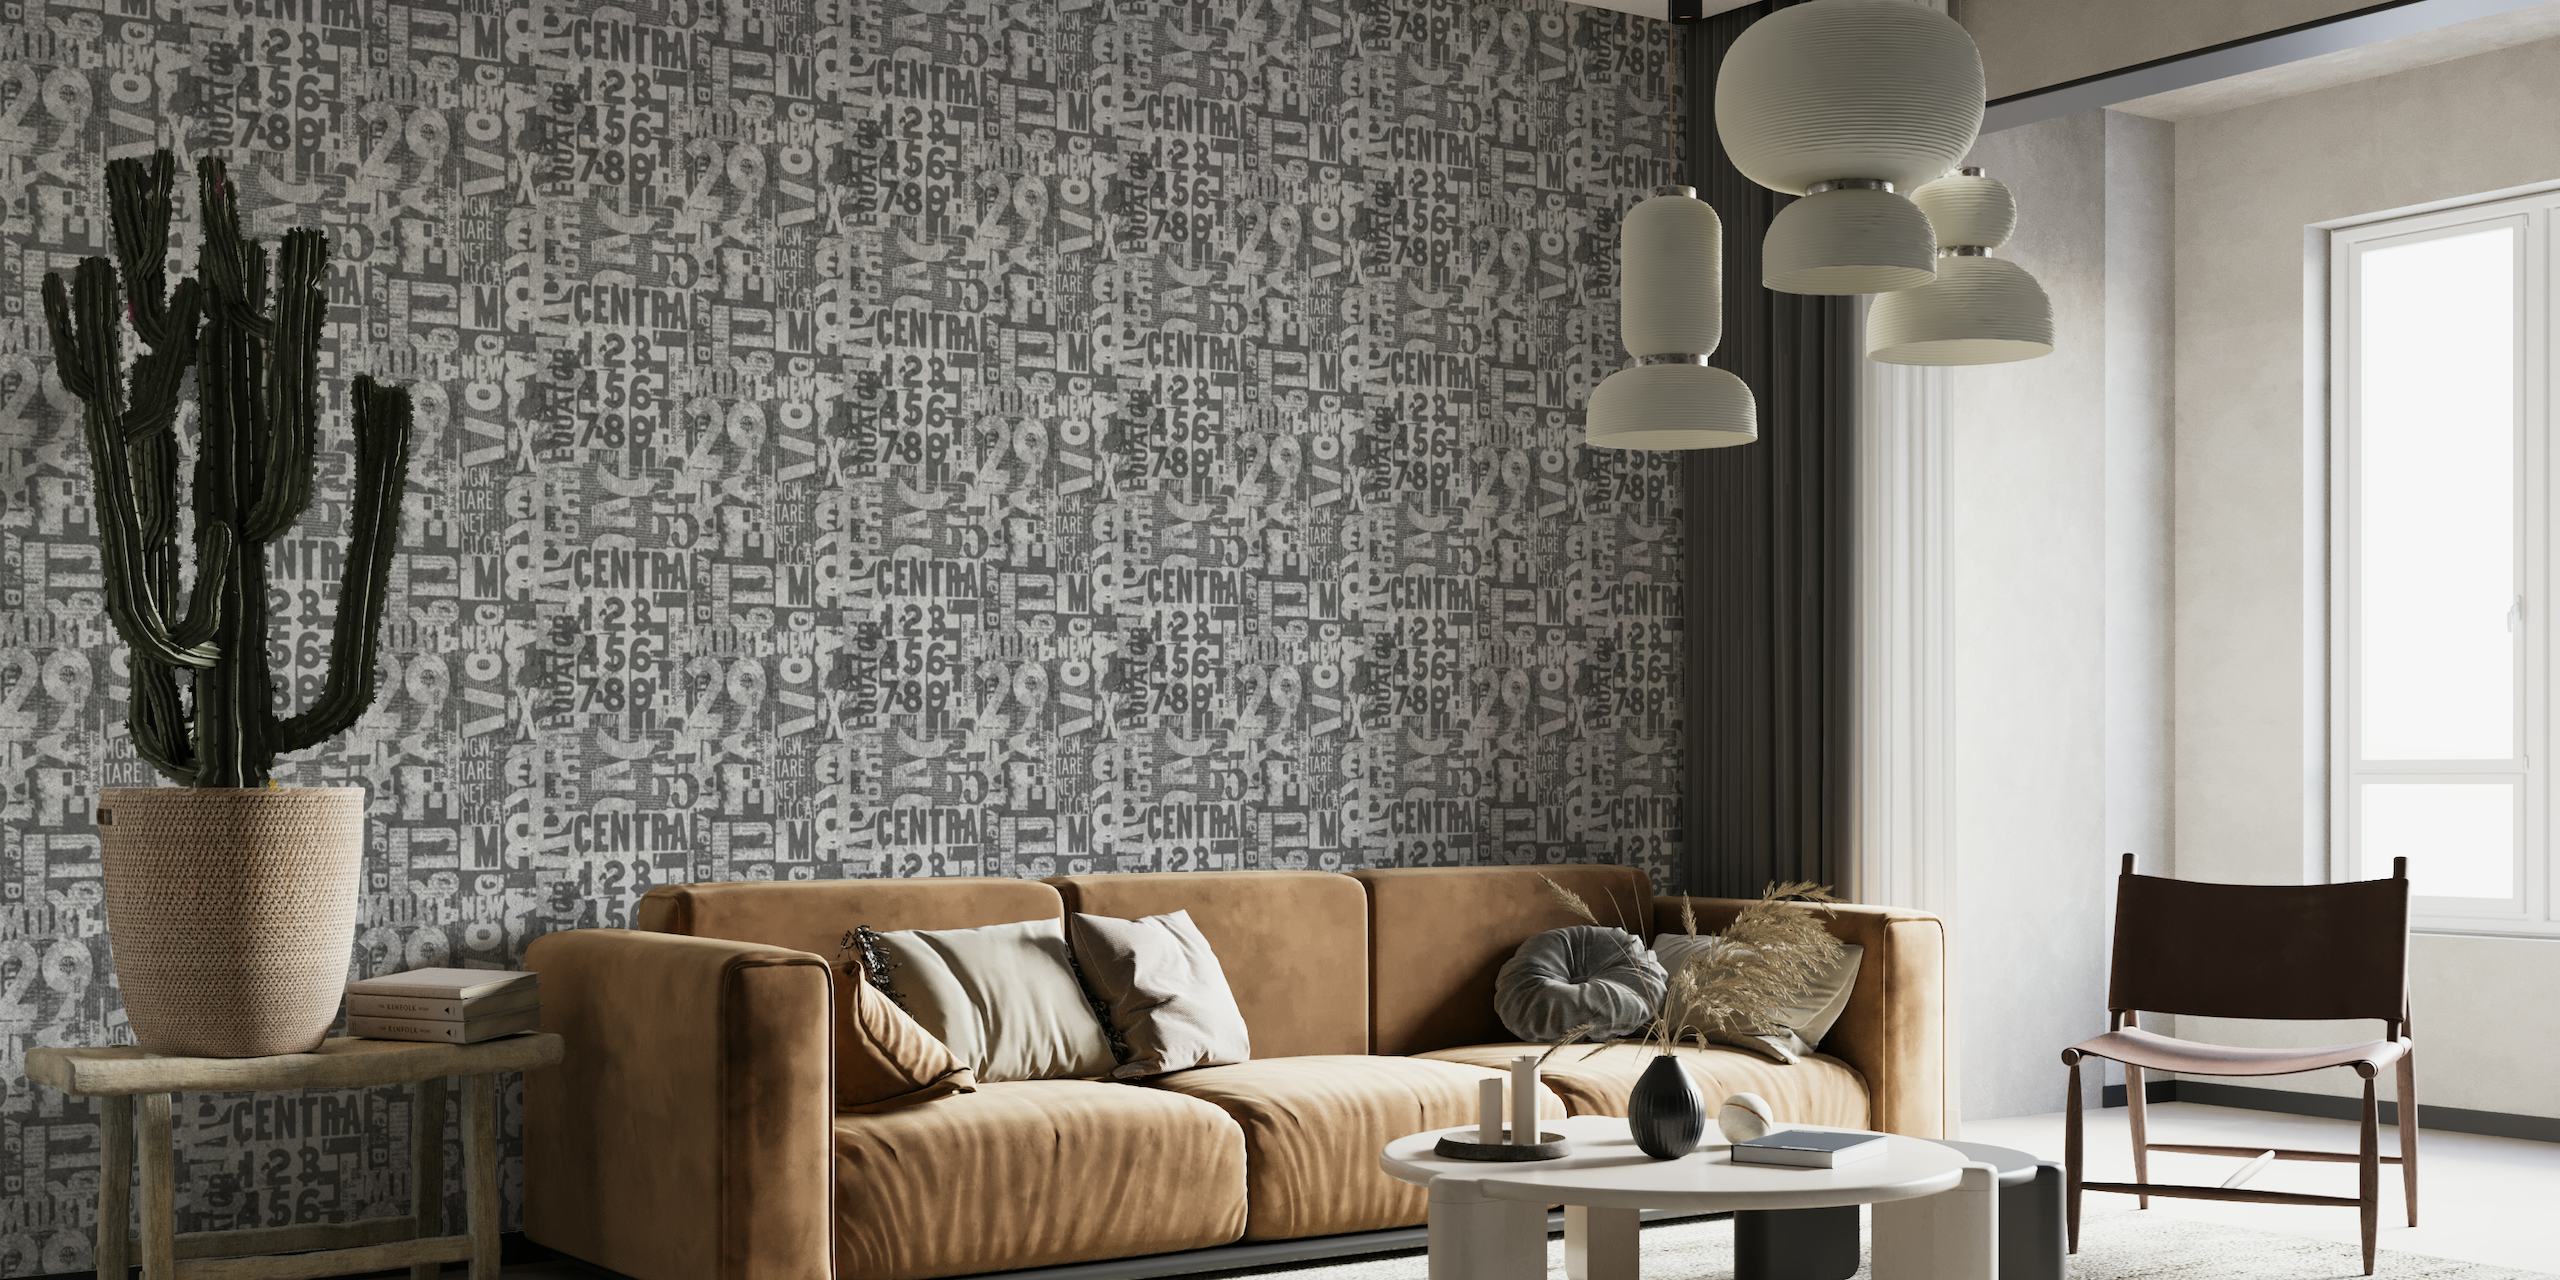 Grunge Typography Urban Style With Letters And Numbers In Neutral Grey wallpaper